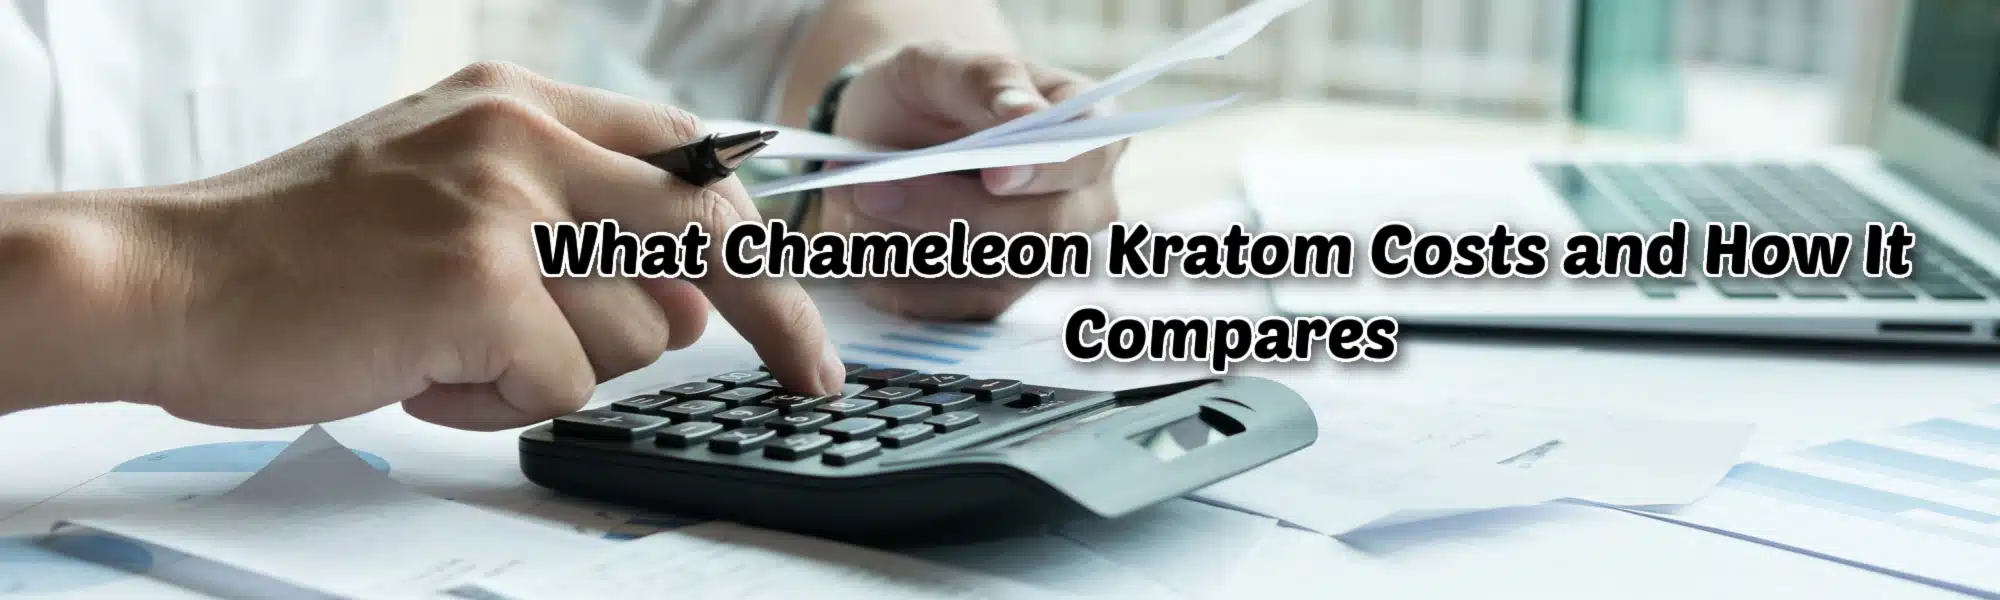 "What chameleon kratom costs and how it compares" banner with person using calculator